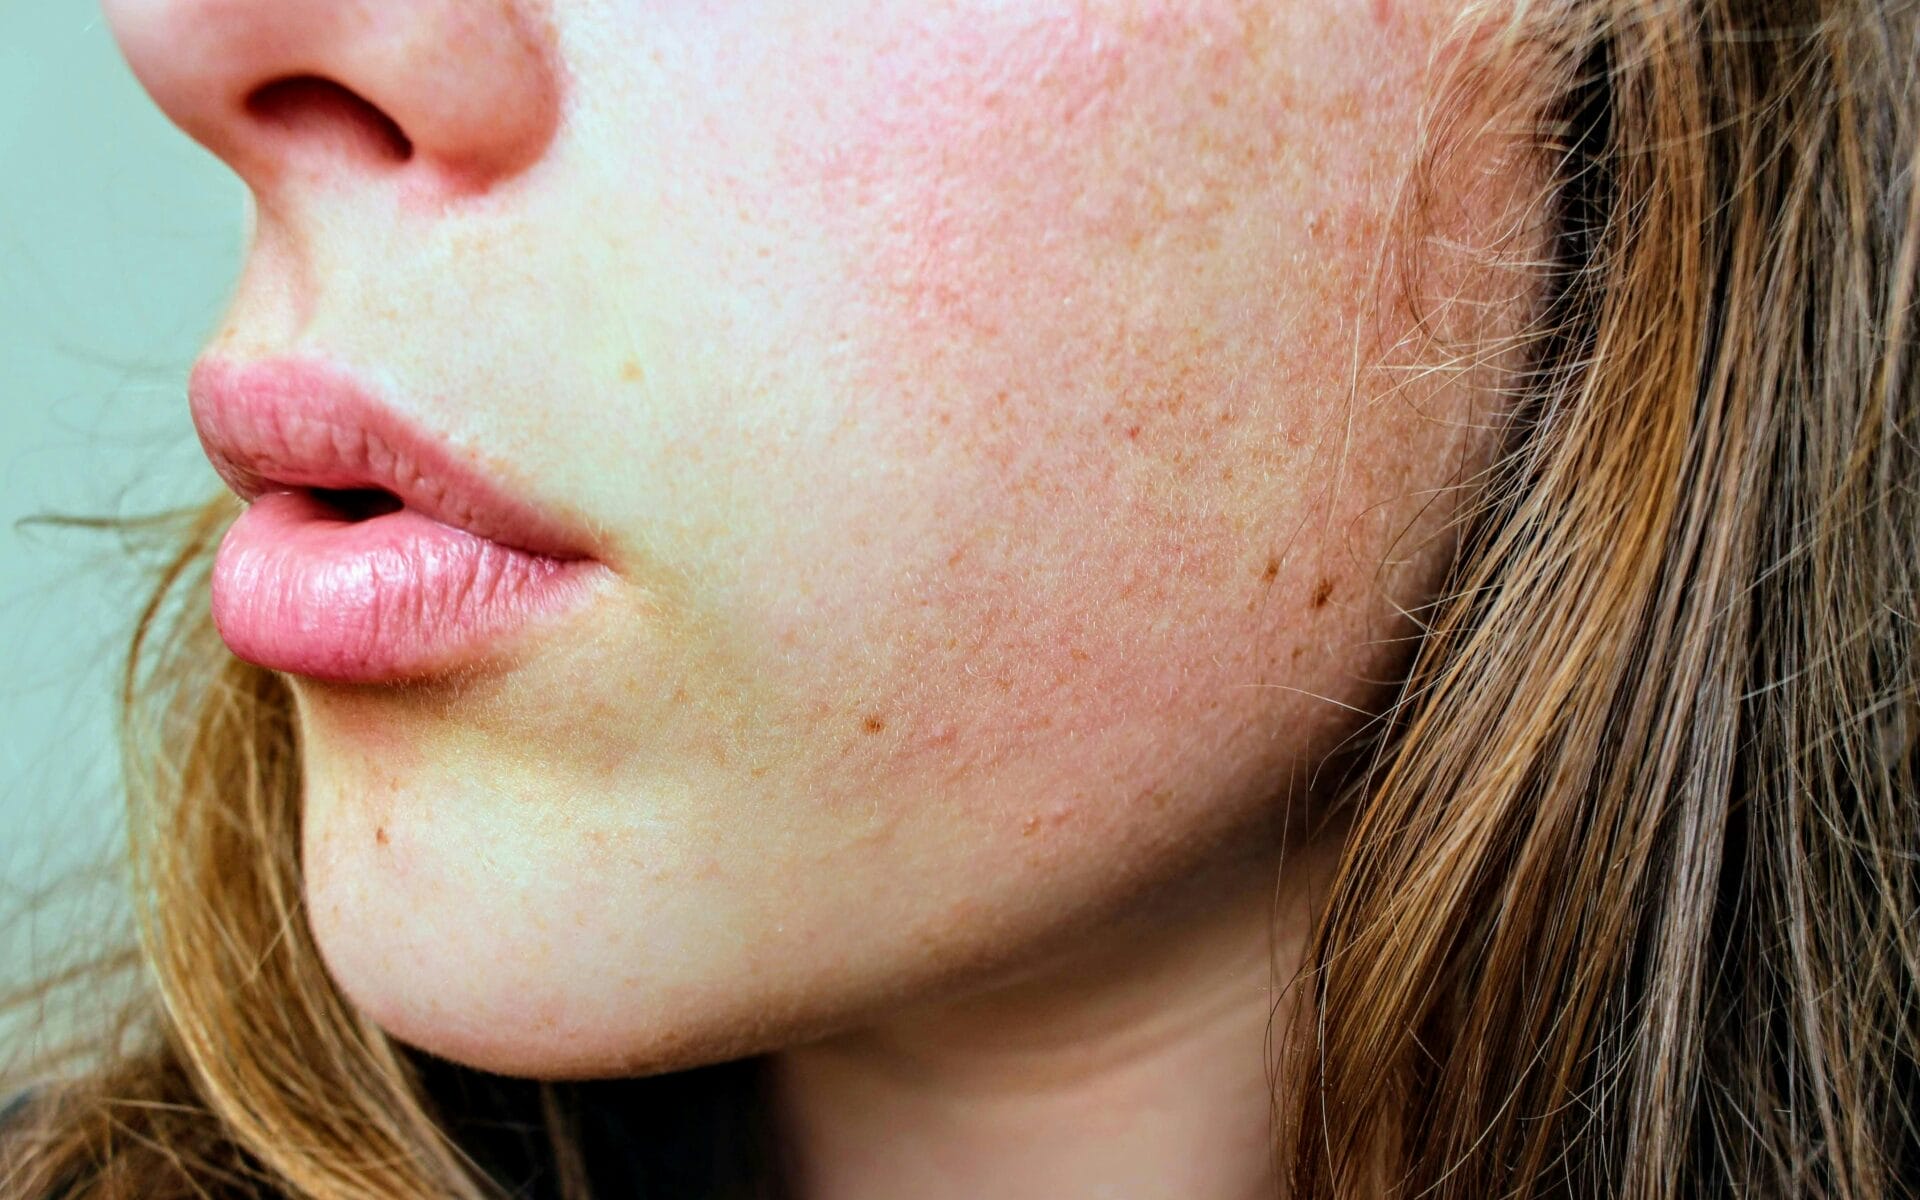 A close up of a woman's face with freckles seems to have dry skin.